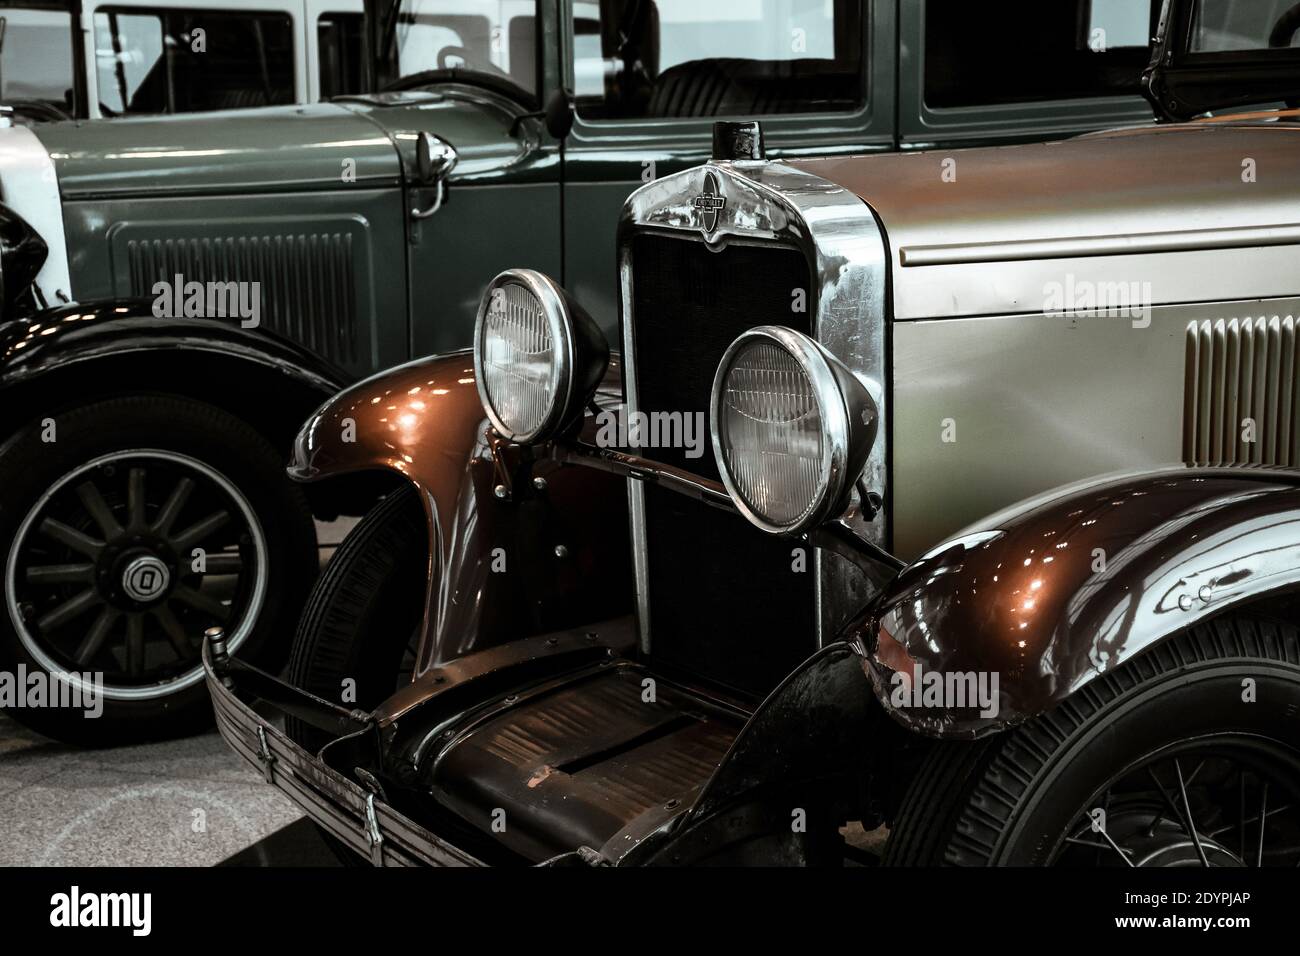 4 June 2019, Moscow, Russia: headlights and fenders of Chevrolet AC Open Tourer 1929. Classical retro cars of 1920s. Stock Photo